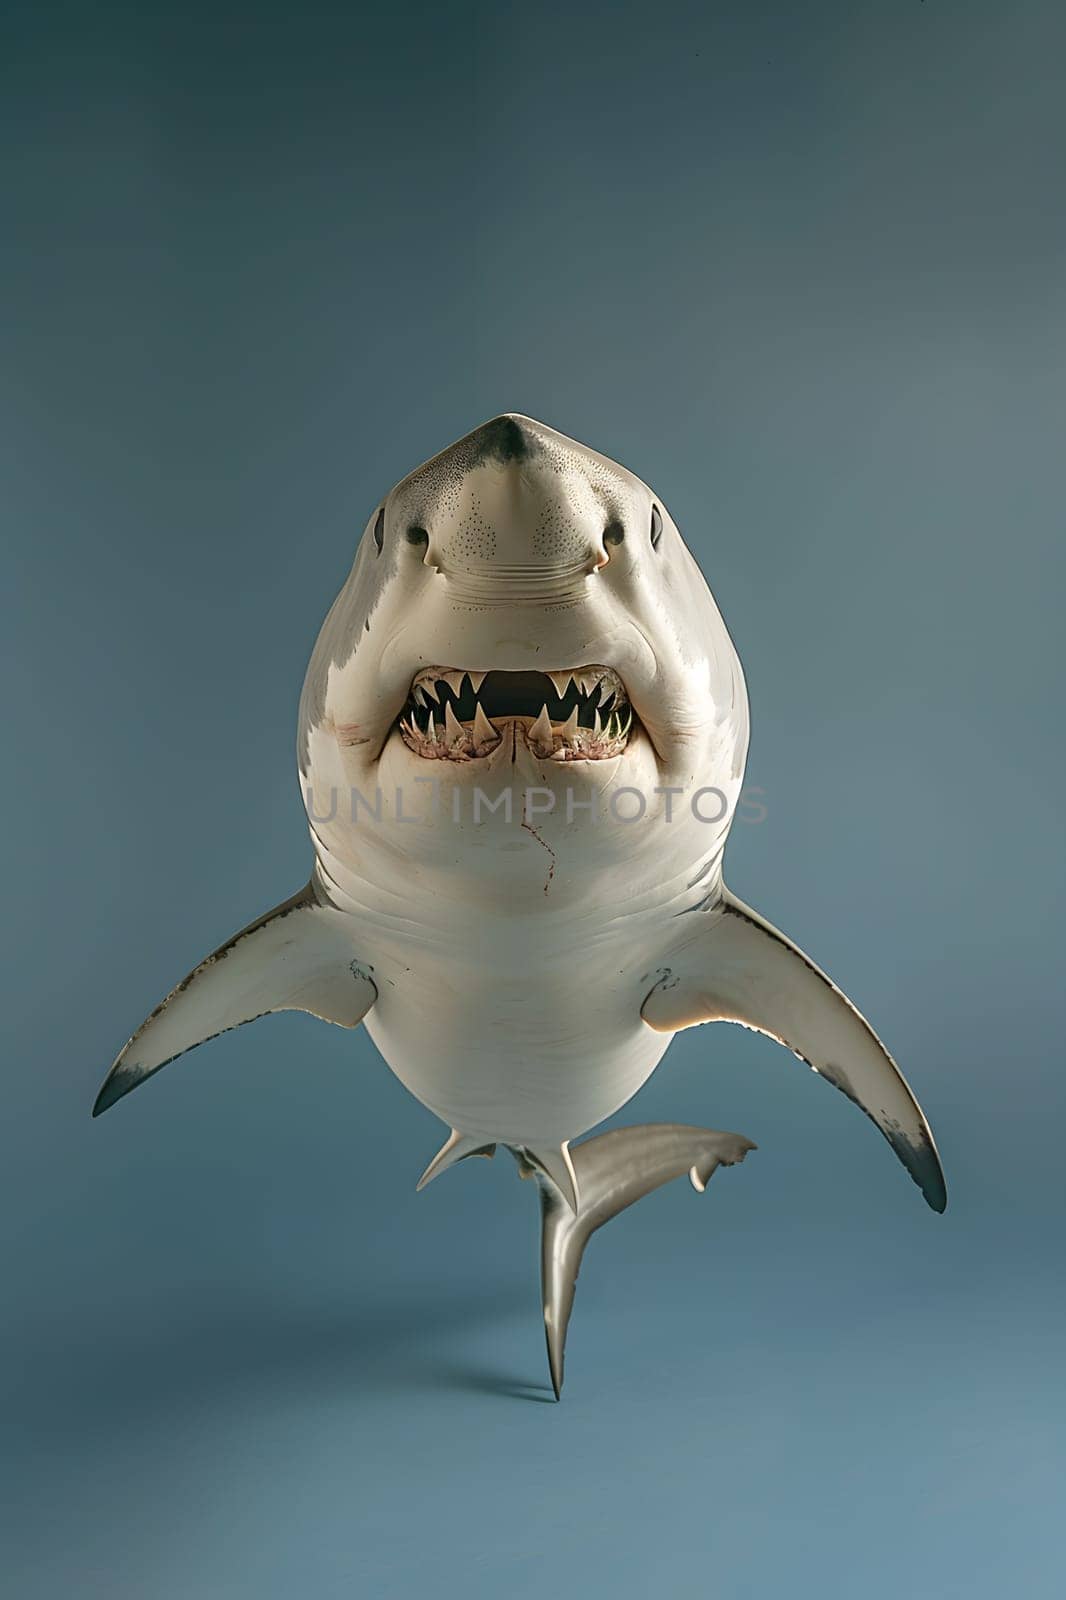 A Lamniformes shark with its jaw open, giving a menacing smile by Nadtochiy